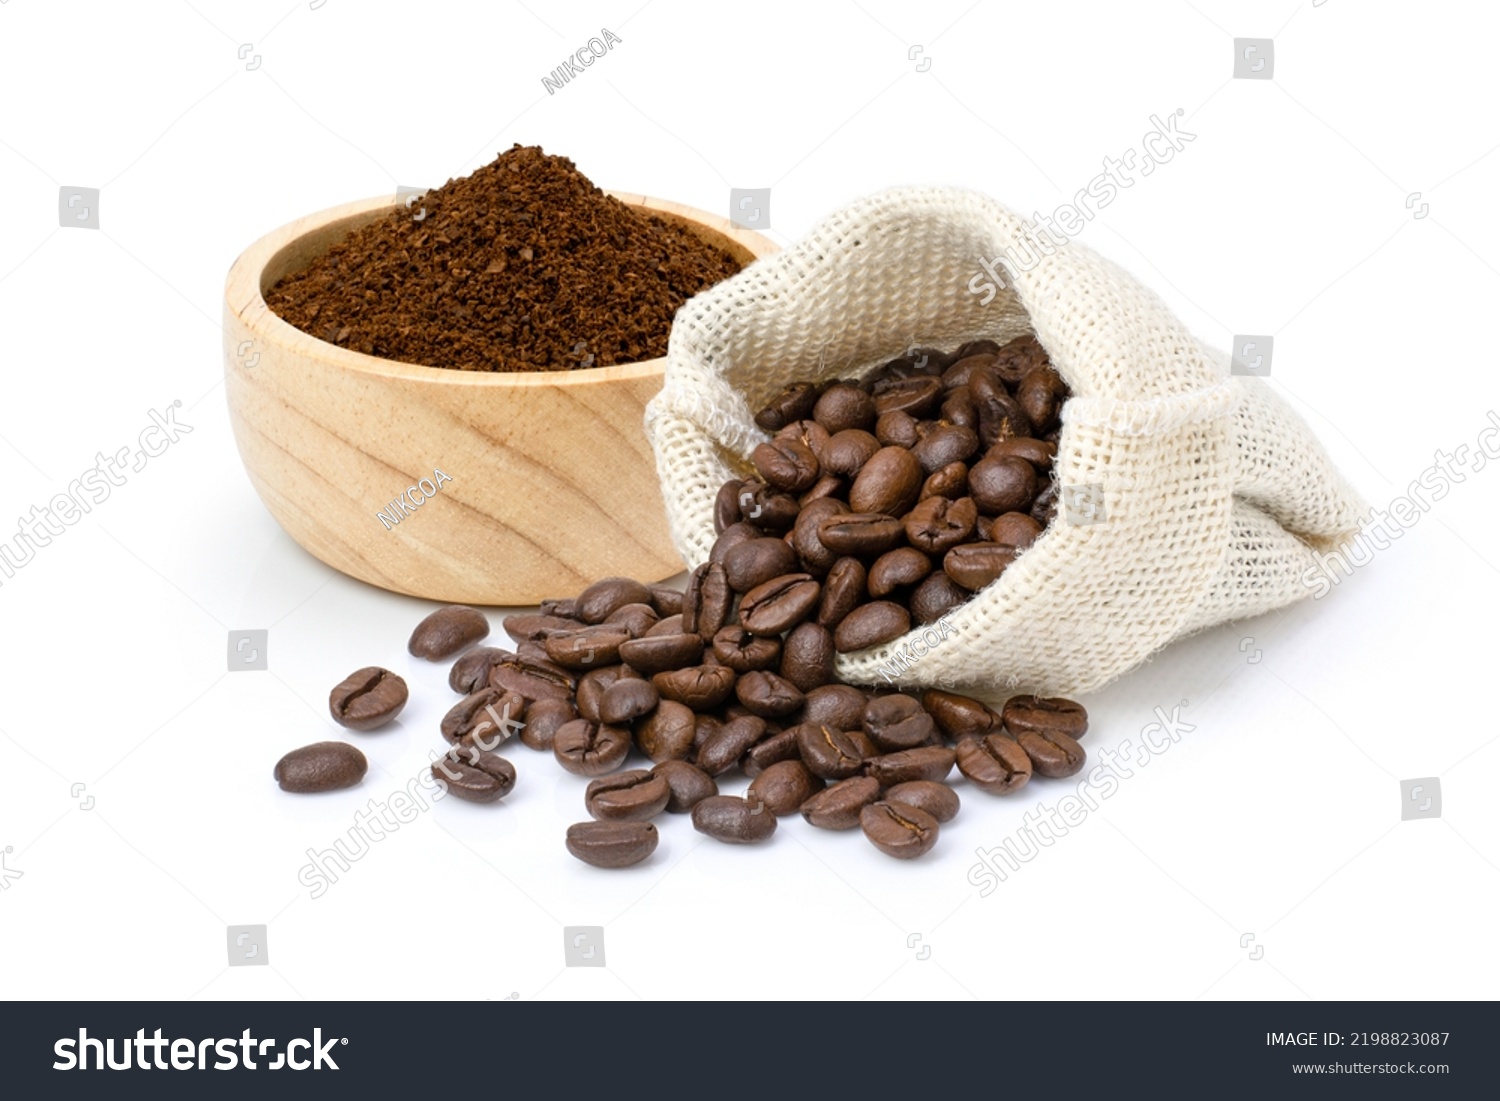 Roasted coffee beans in sack bag with coffe powder (ground coffee) in wooden bowl isolated on white background.  #2198823087